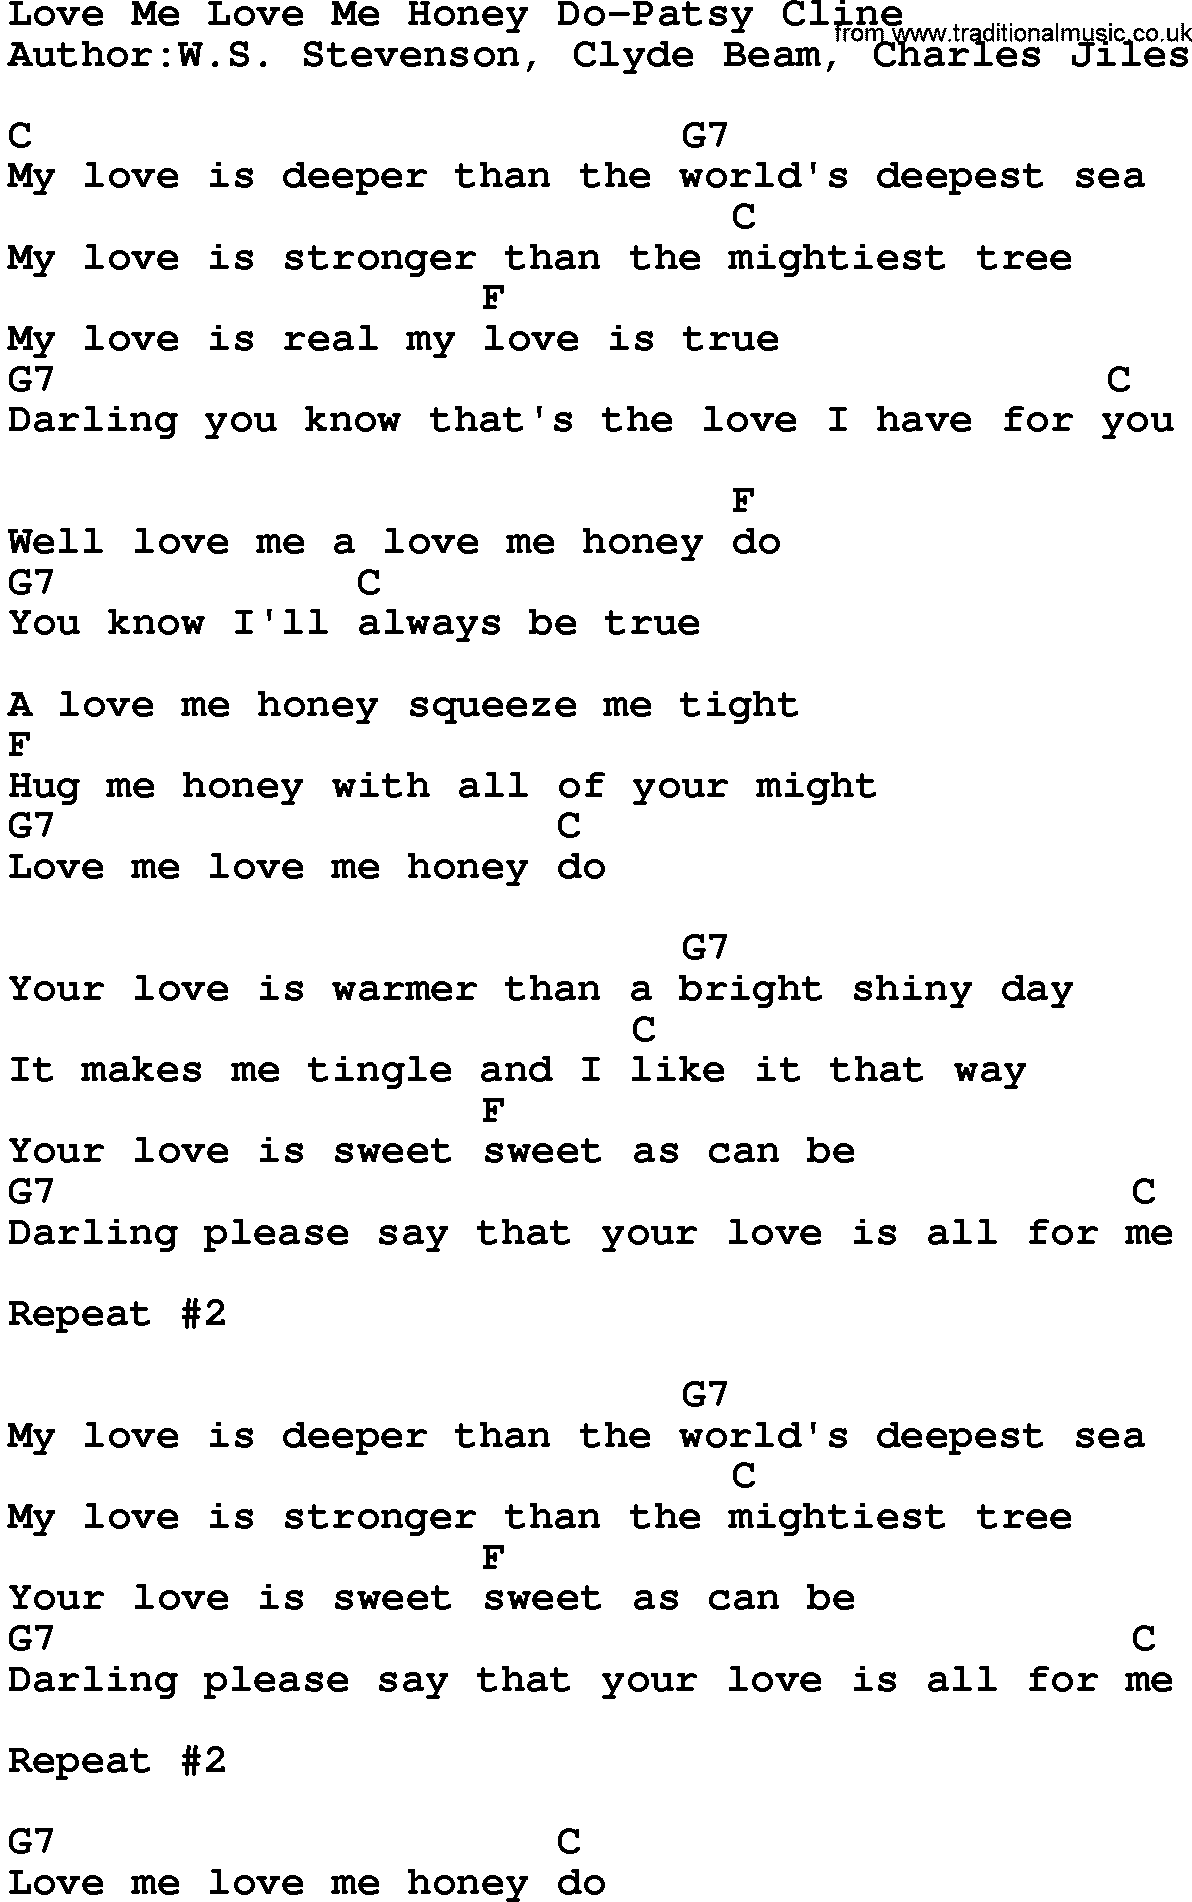 Country music song: Love Me Love Me Honey Do-Patsy Cline lyrics and chords